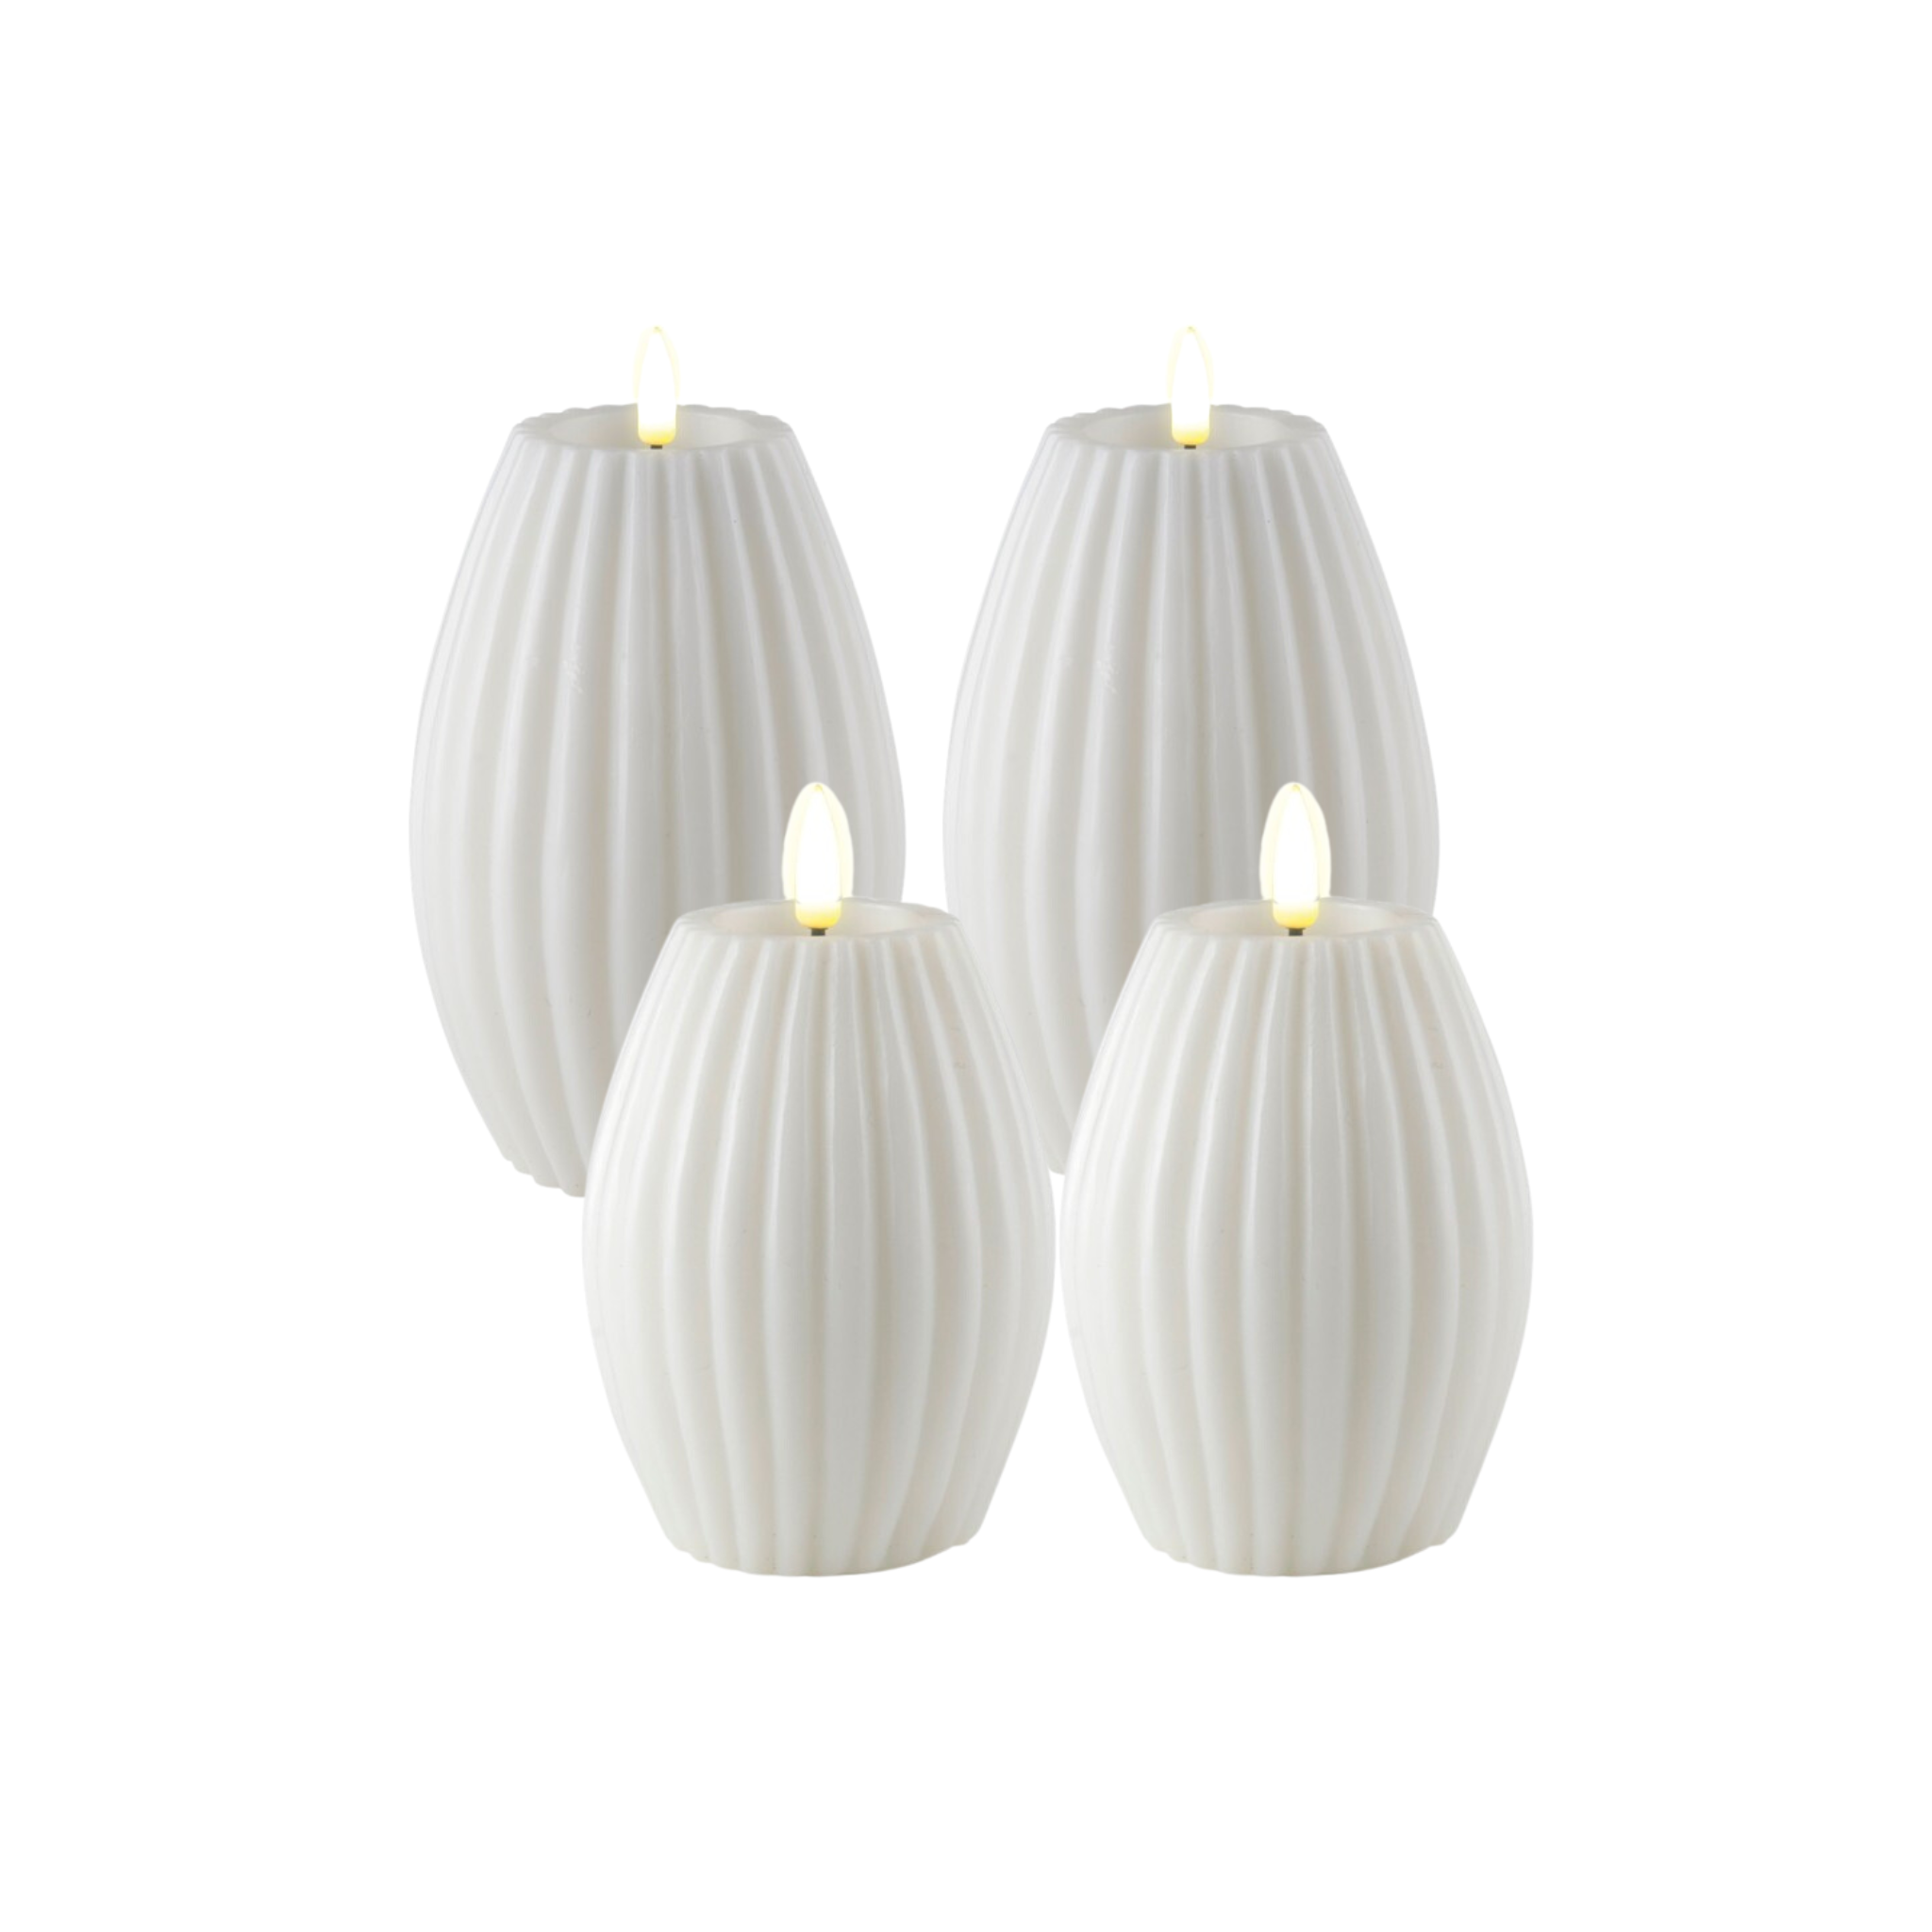 Deluxe Homeart LED candle set indoor oval white - 0